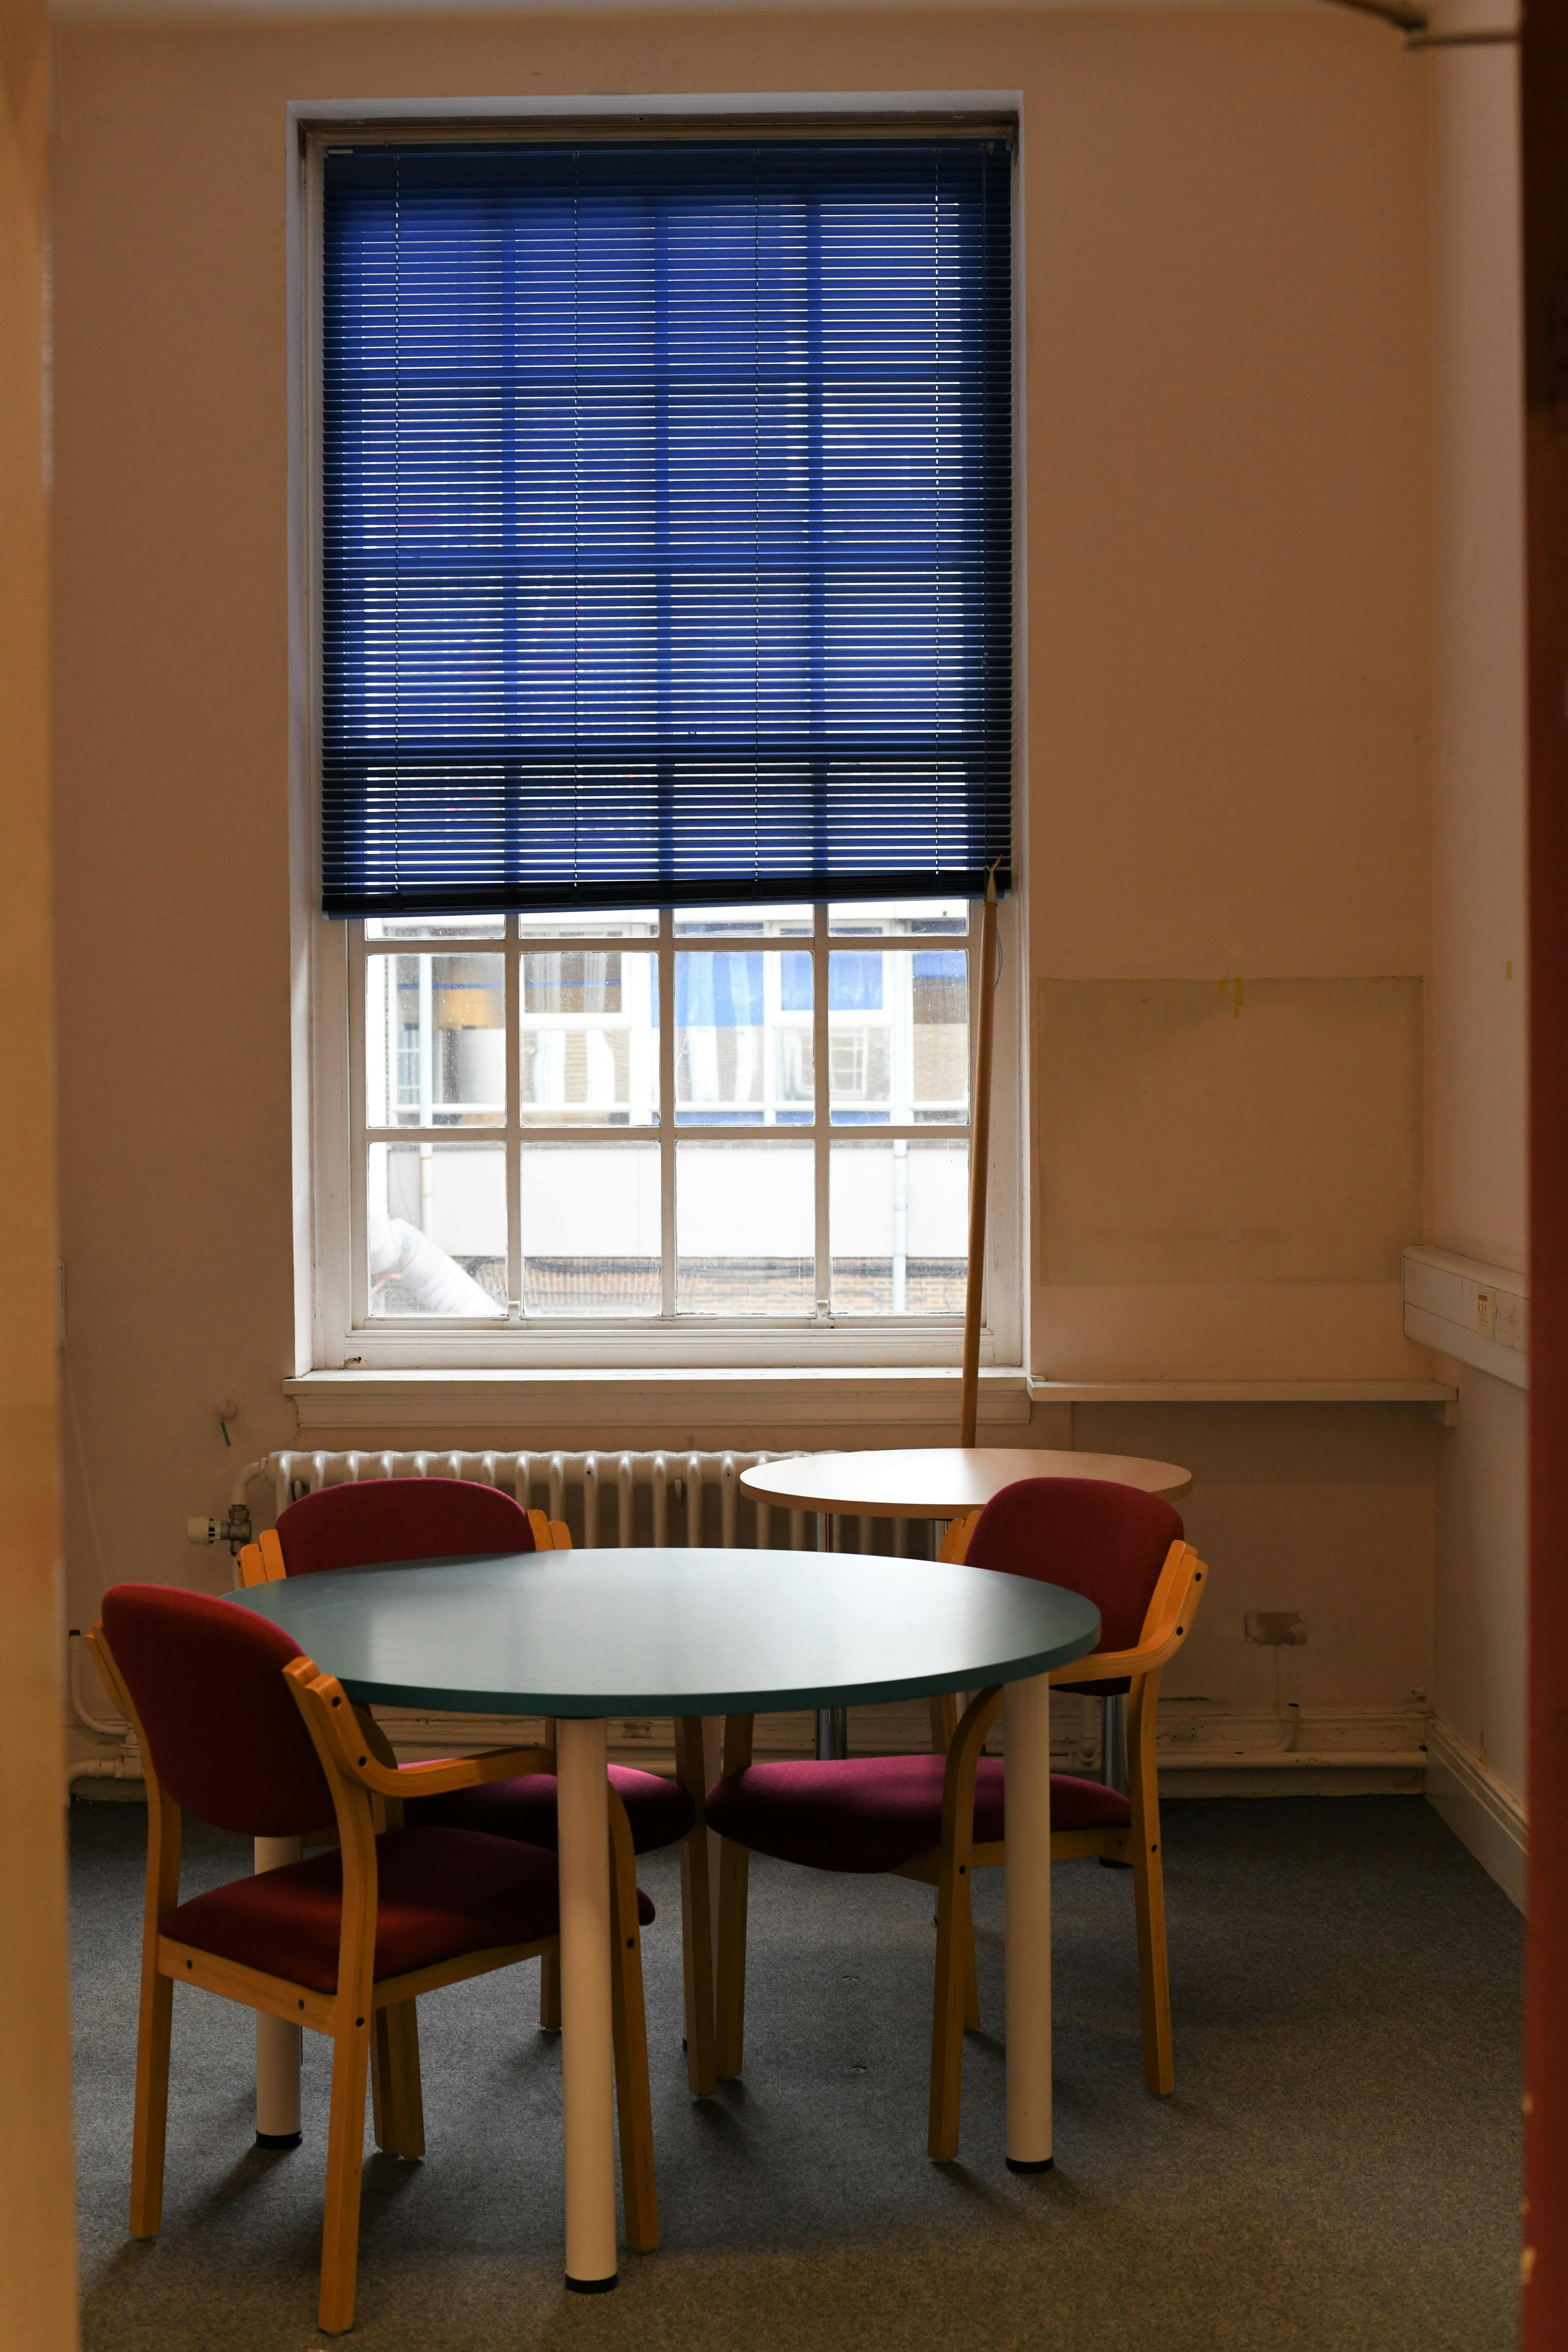 A meeting room in the Town Hall